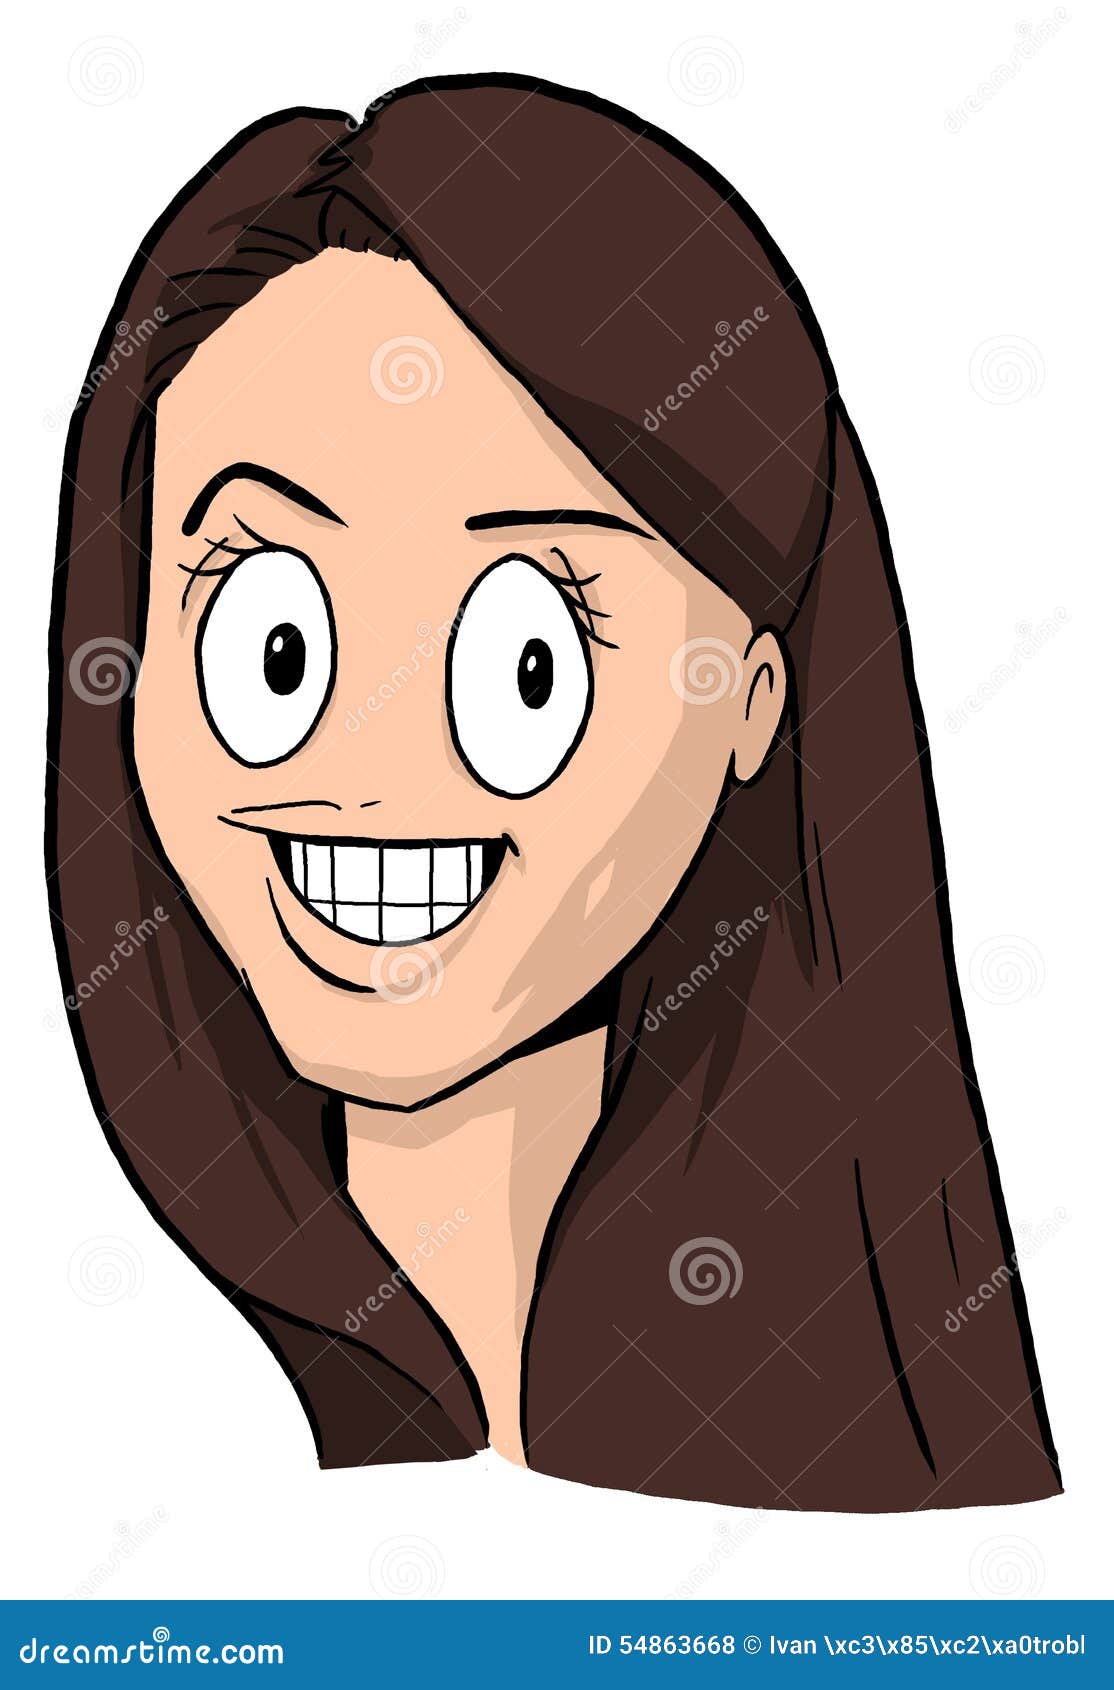 Caricature Of Girl With Dark Brown Hair Big Eyes And Big